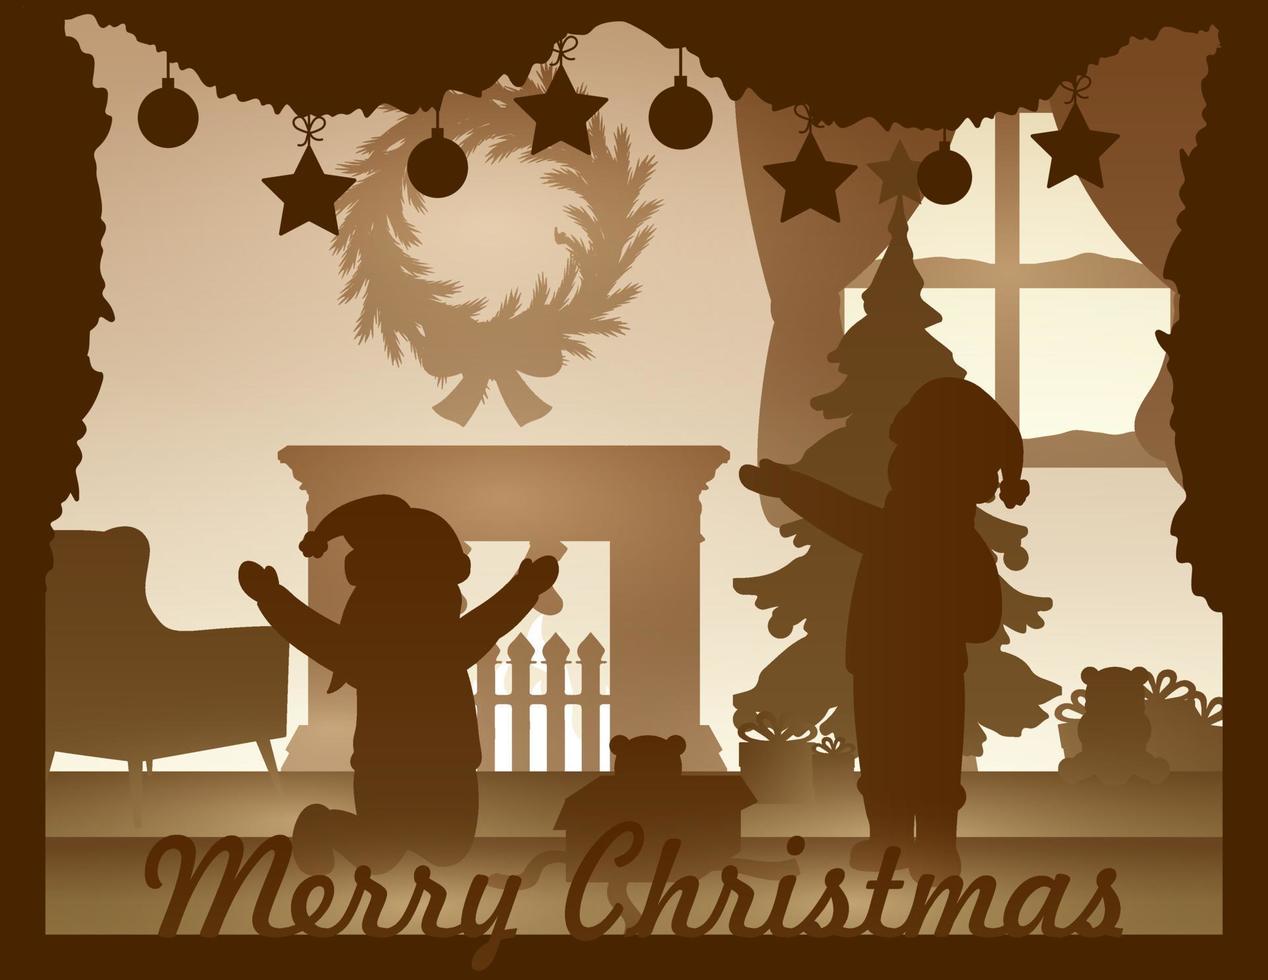 Happy Kids Silhouette Opens gifts at Christmas Celebration. Happy Kids Celebrate Christmas Indoors with some christmas decorations vector